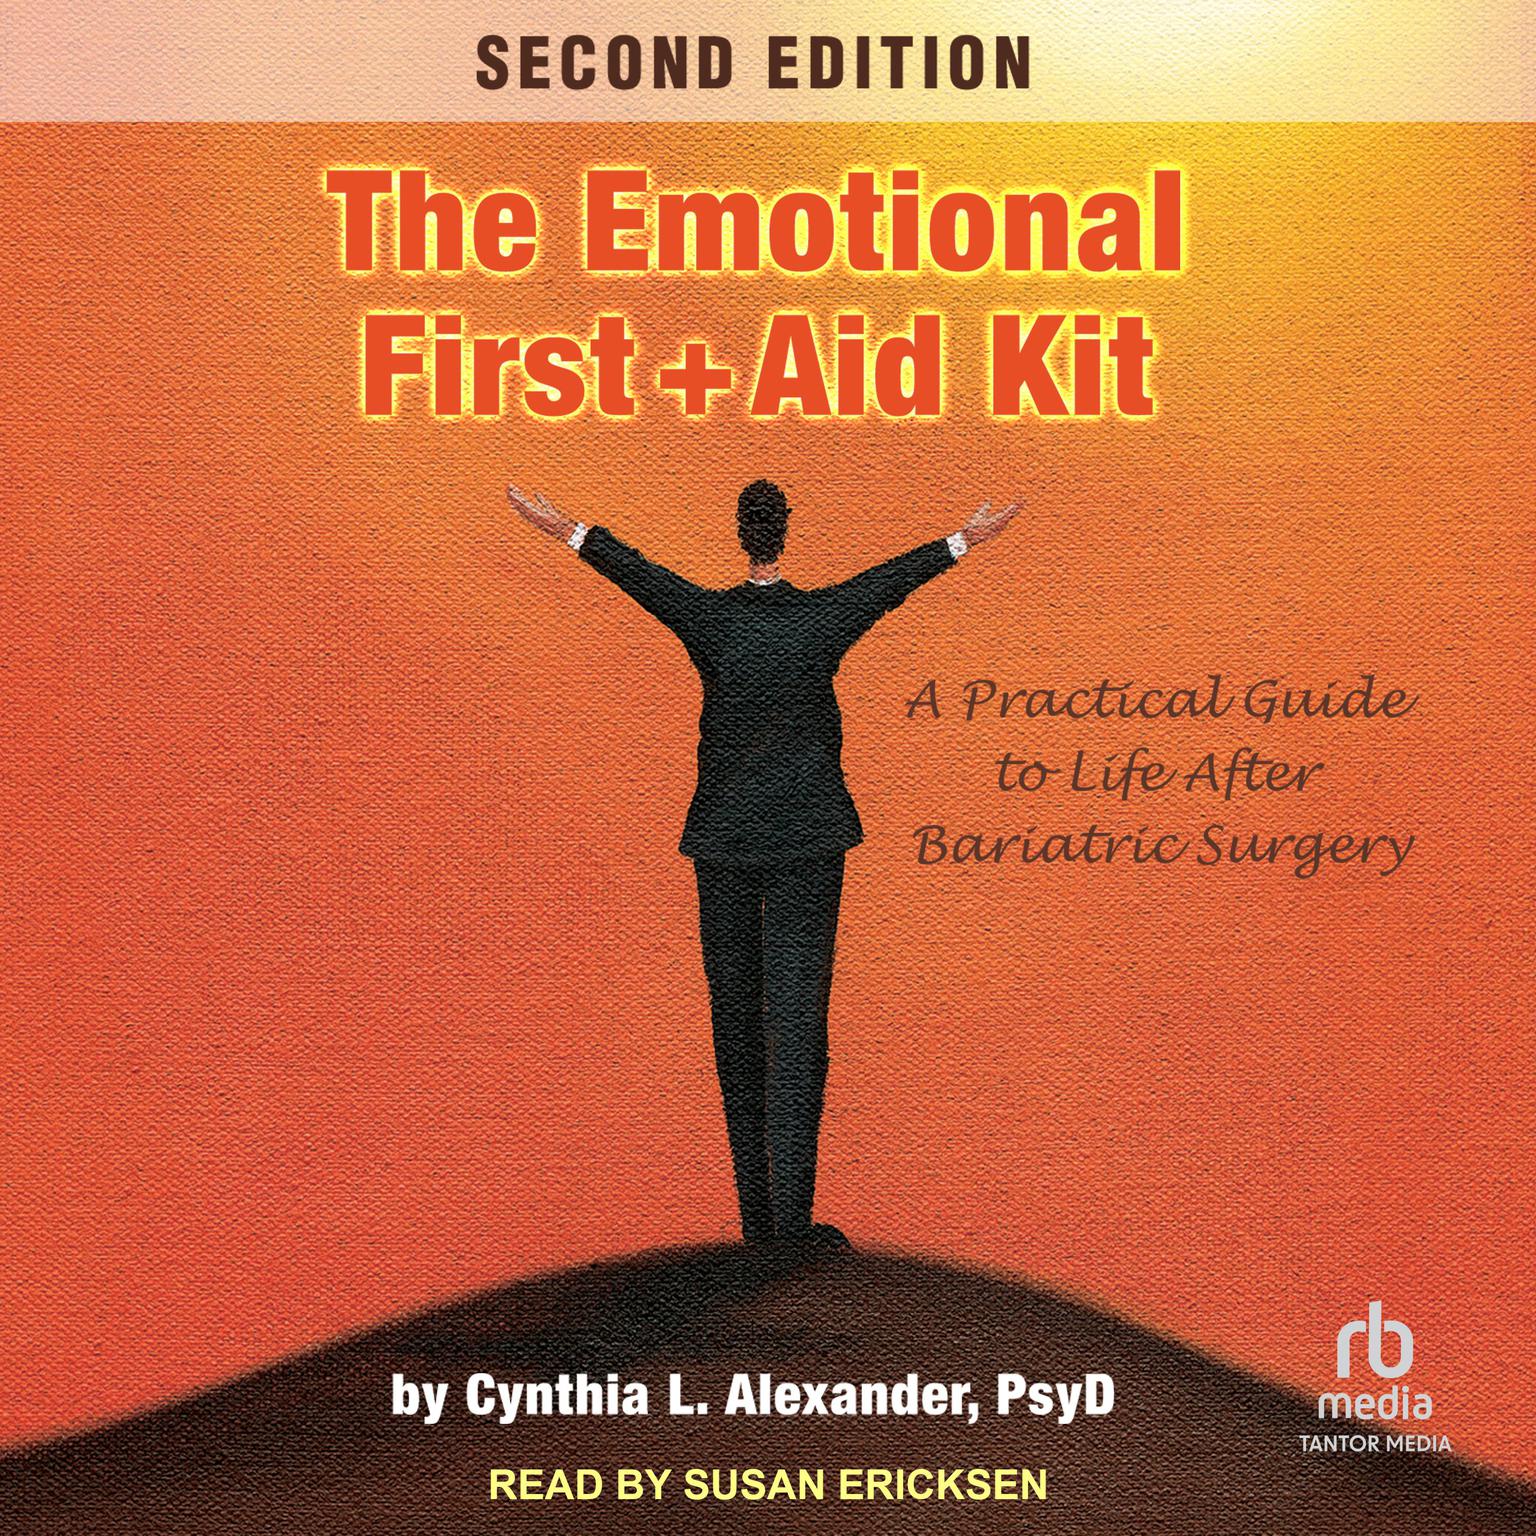 The Emotional First Aid Kit: A Practical Guide to Life After Bariatric Surgery Audiobook, by Cynthia L. Alexander